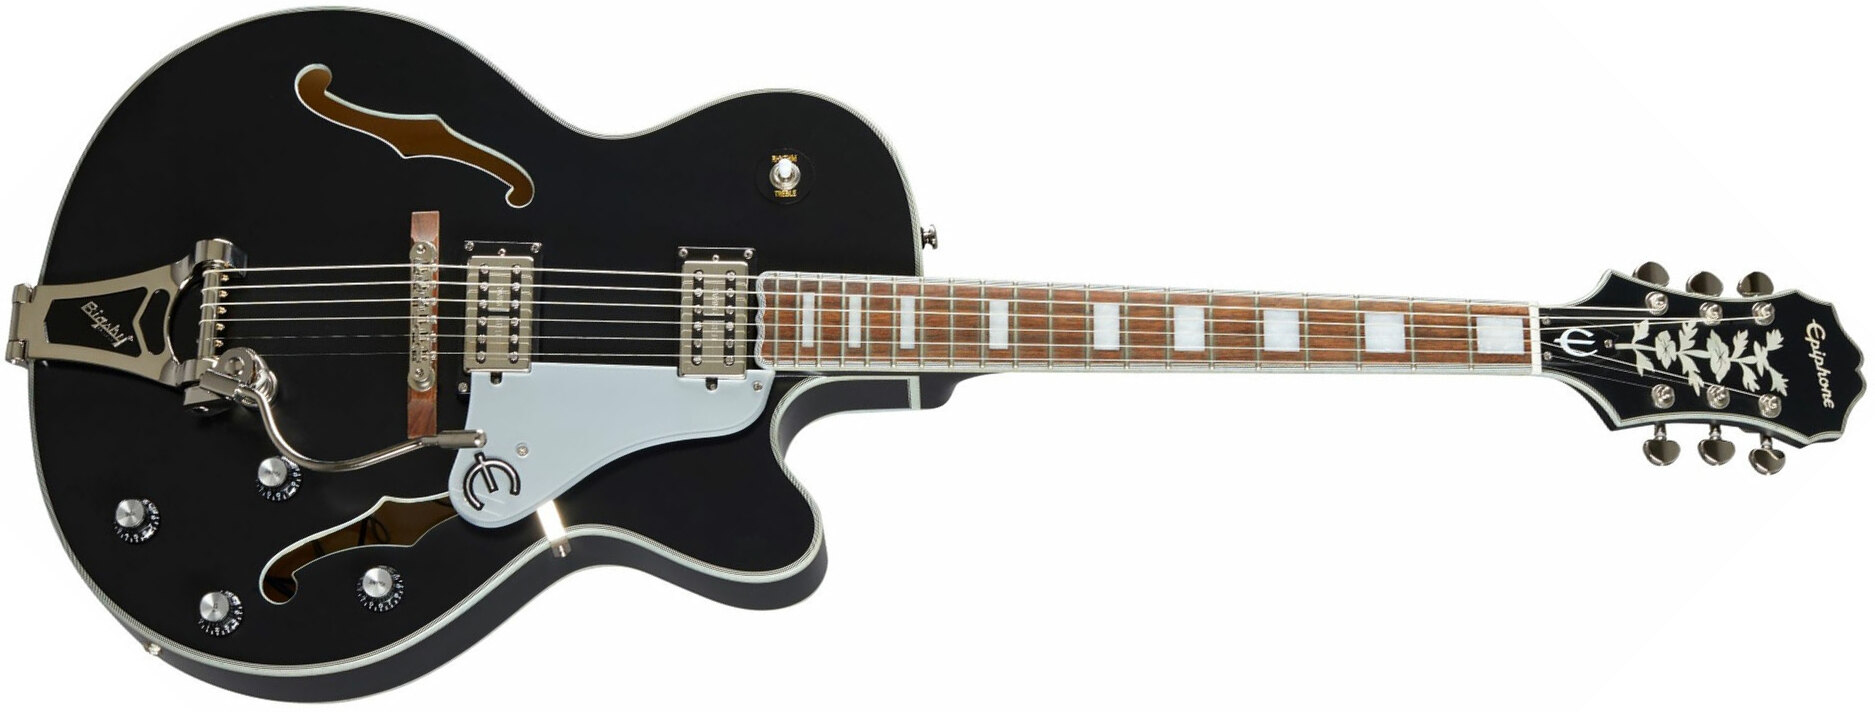 Epiphone Emperor Swingster Archtop 2h Trem Lau - Black Aged Gloss - Hollowbody E-Gitarre - Main picture